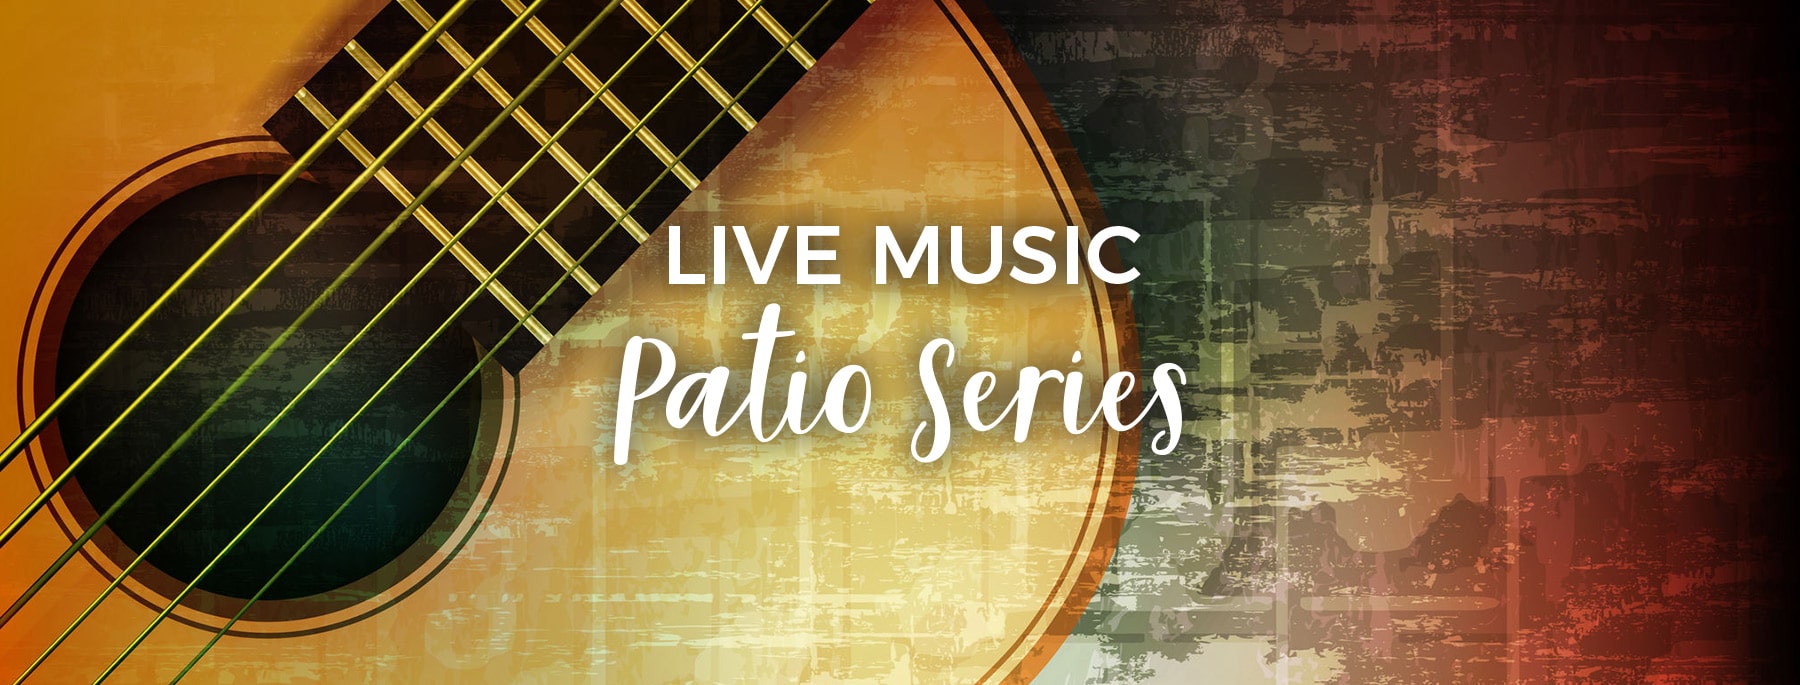 Featured image for “Live Music Patio Series”